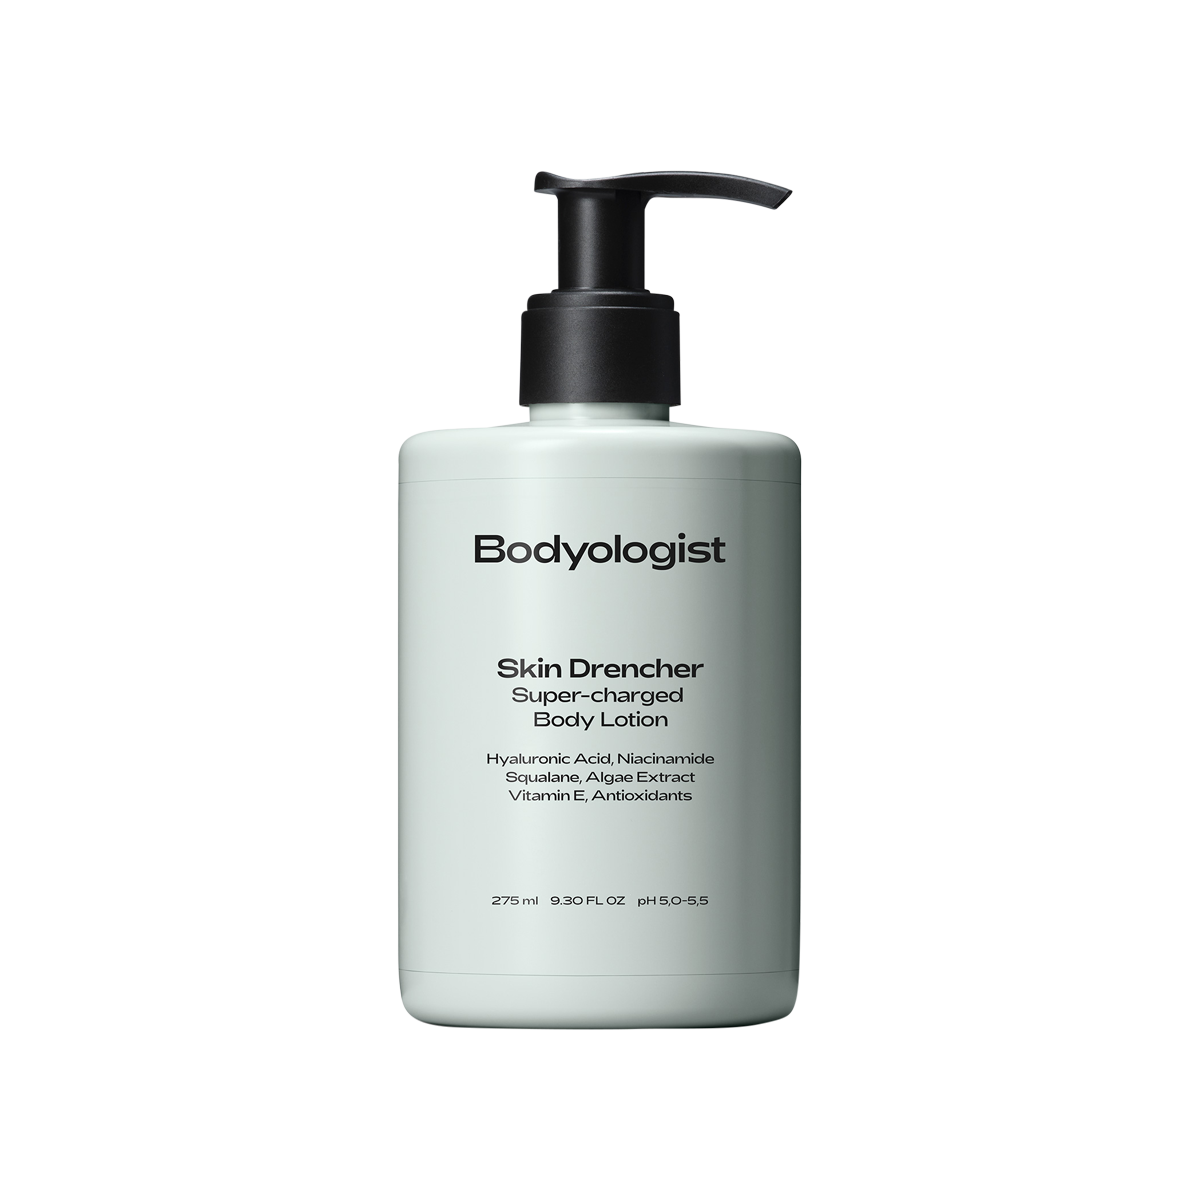 Bodyologist - Skin Drencher Super-charged Body Lotion